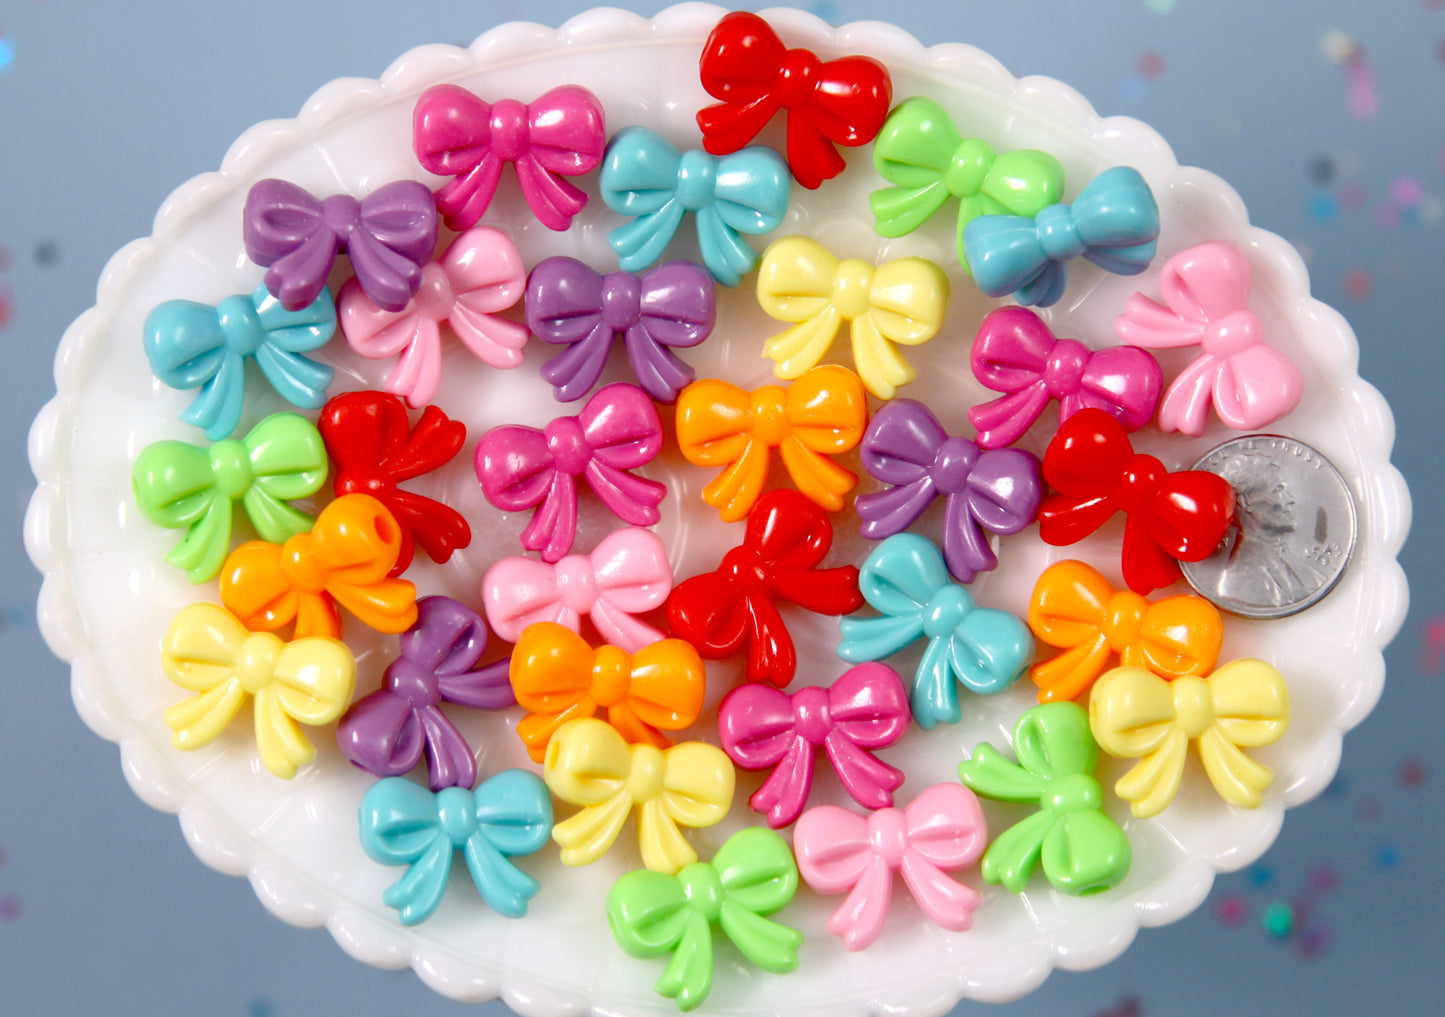 Acrylic Beads - 20mm Small Colorful Bow or Ribbon Shape Acrylic or Resin Beads - 40 pc set